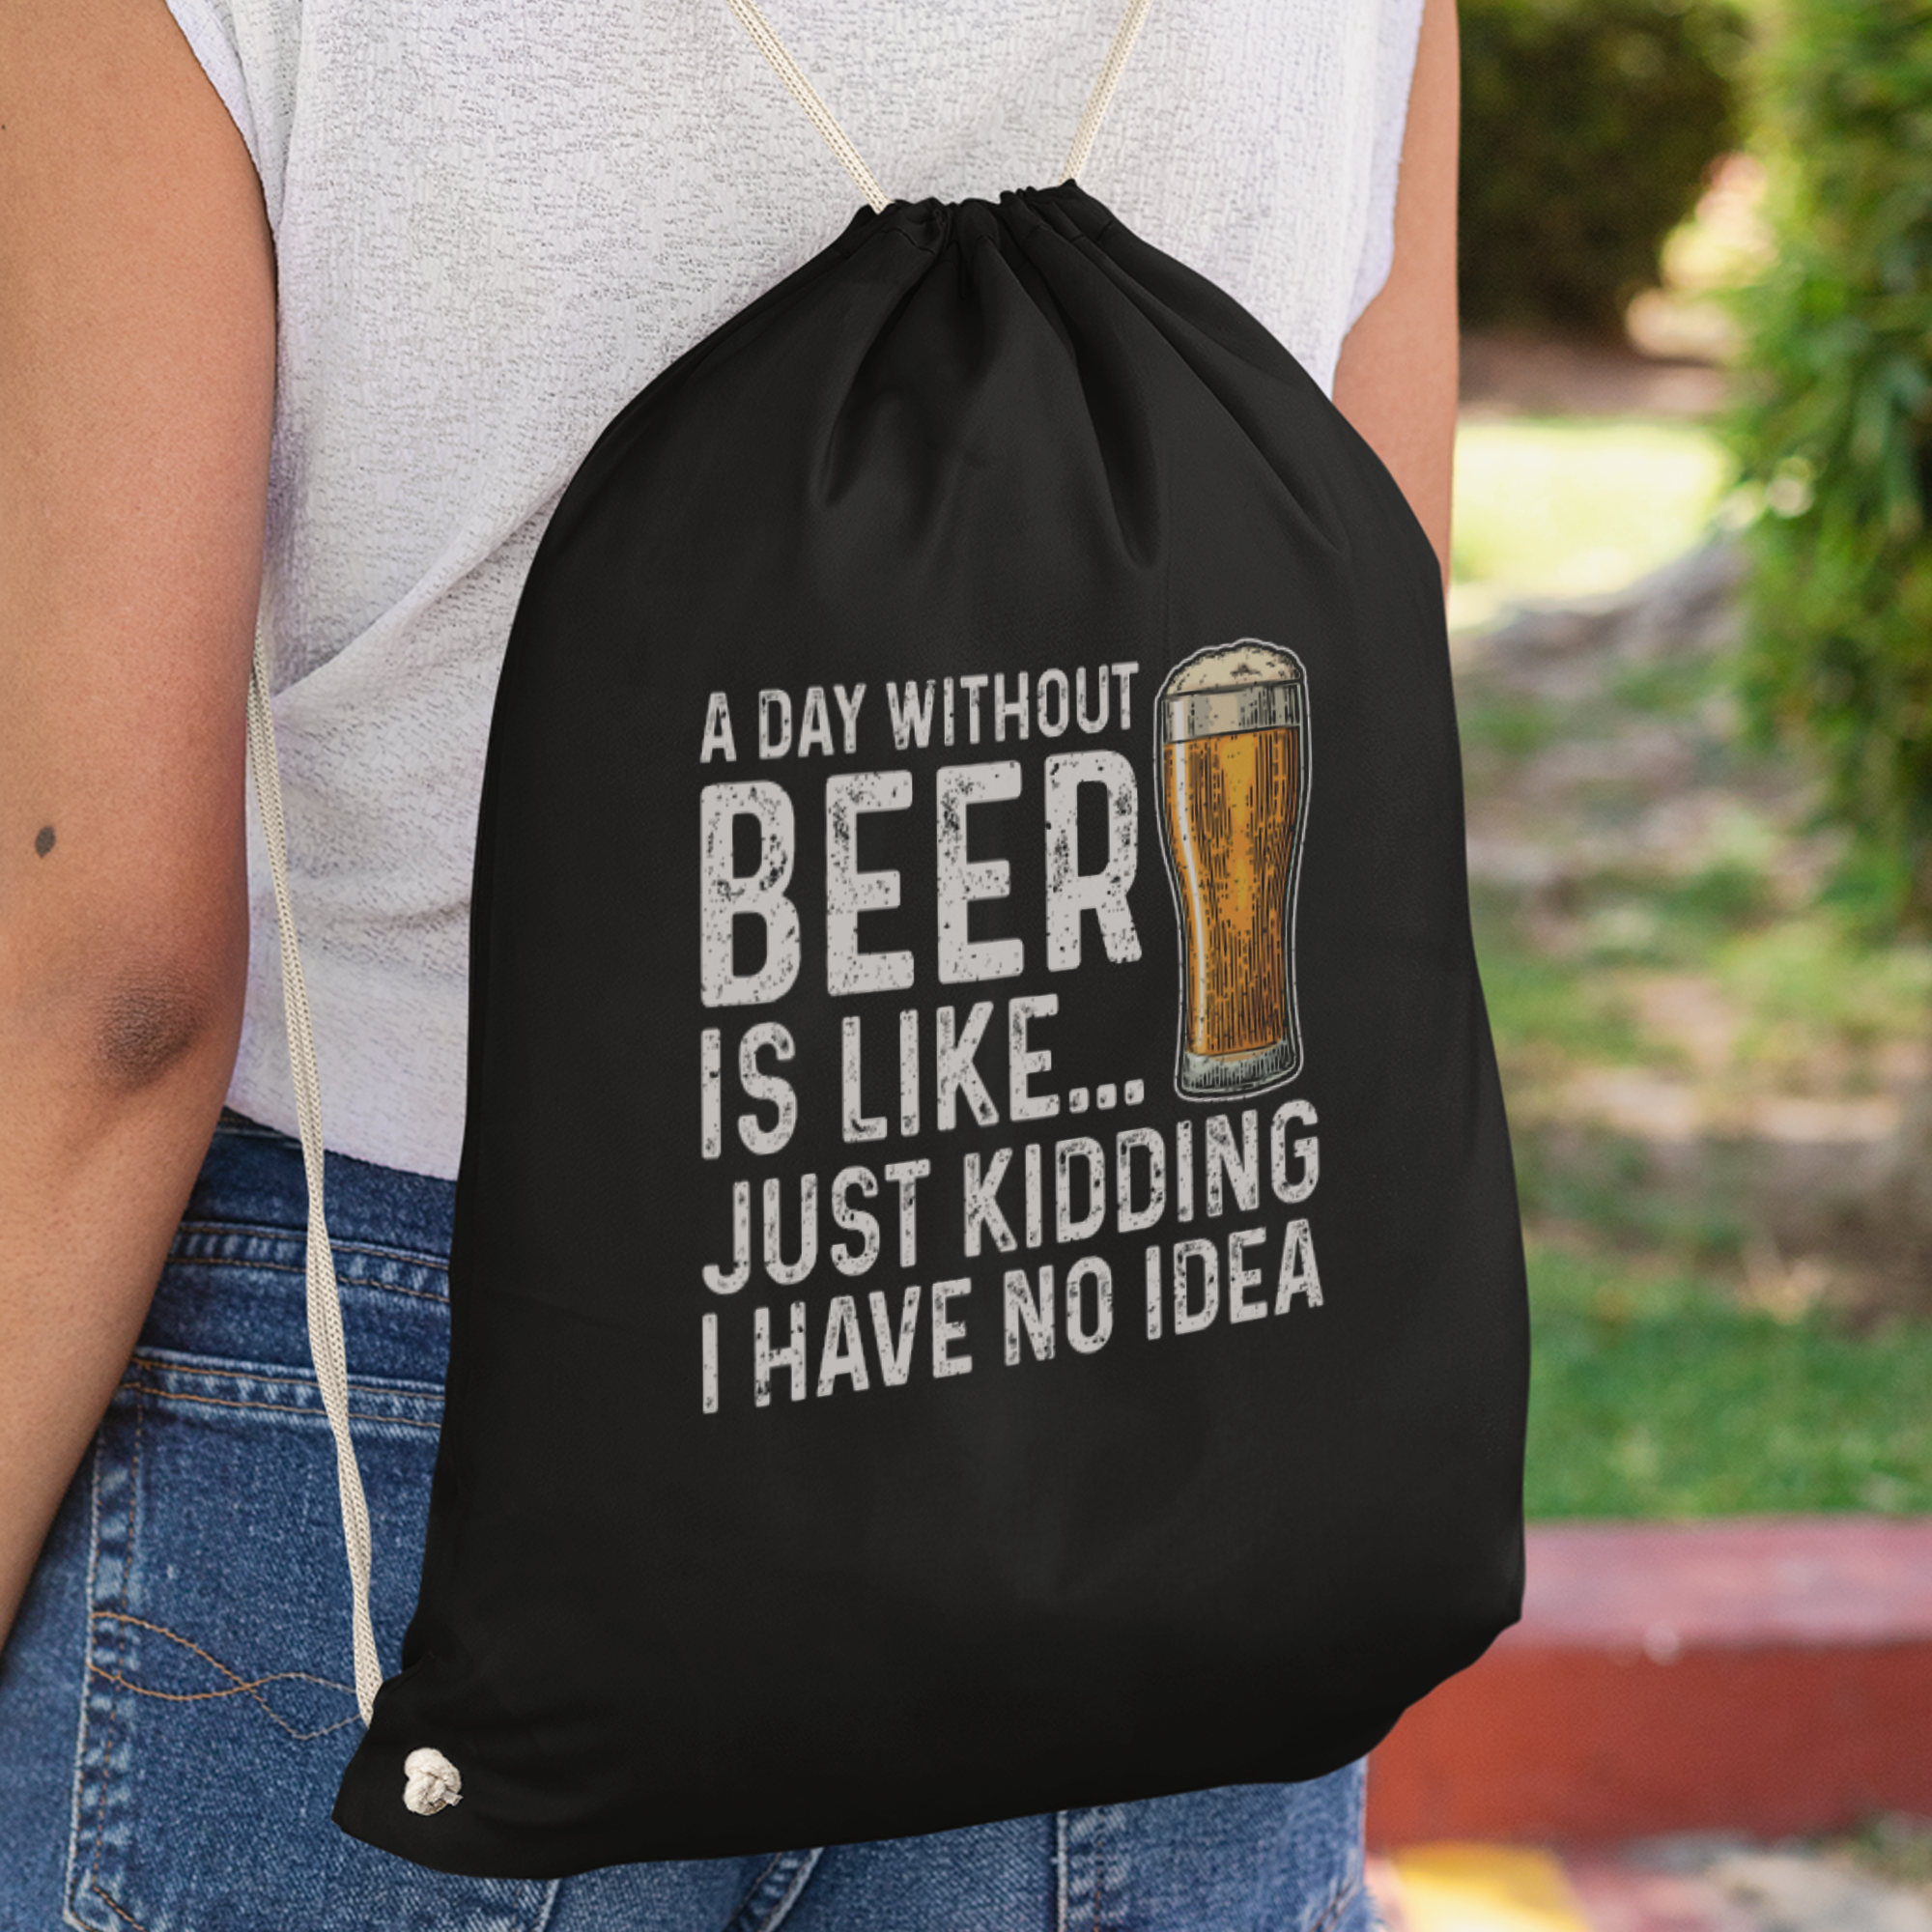 A Day Without Beer Is Like Just Kidding I Have No Idea Turnbeutel - DESIGNSBYJNK5.COM